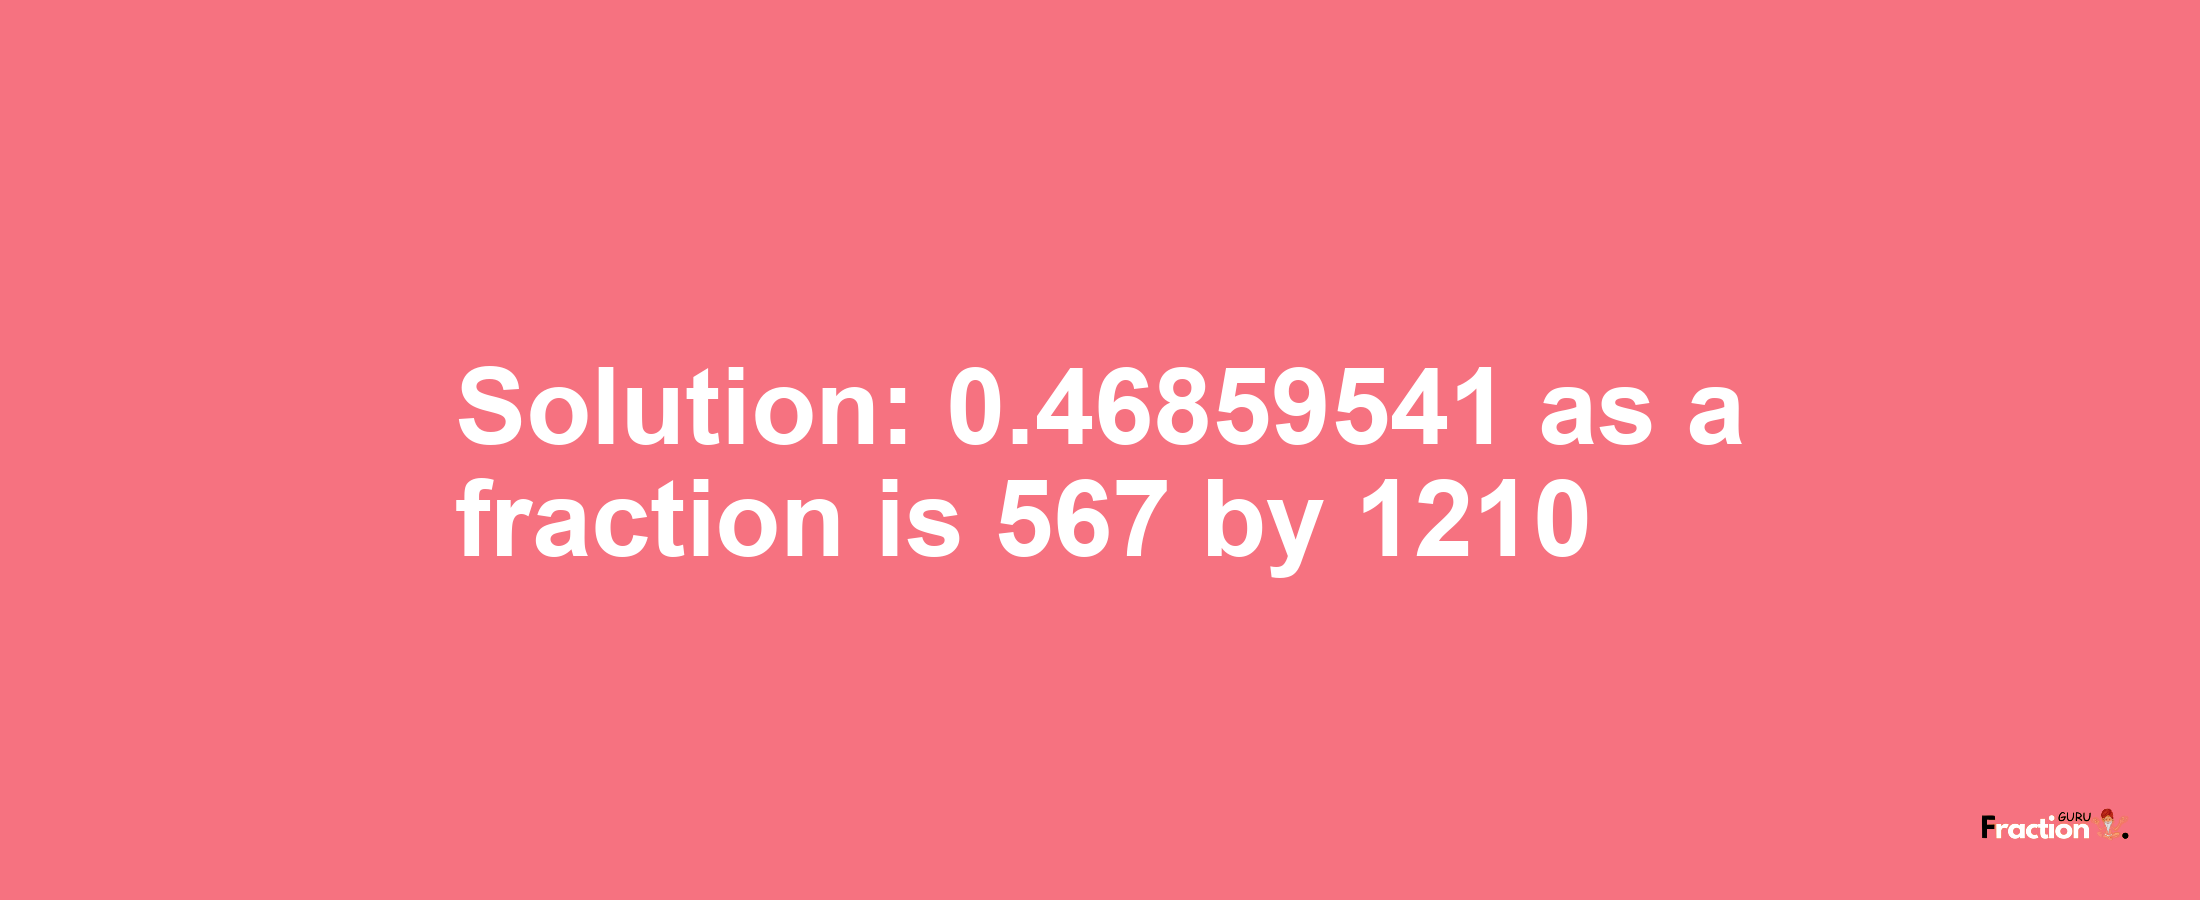 Solution:0.46859541 as a fraction is 567/1210